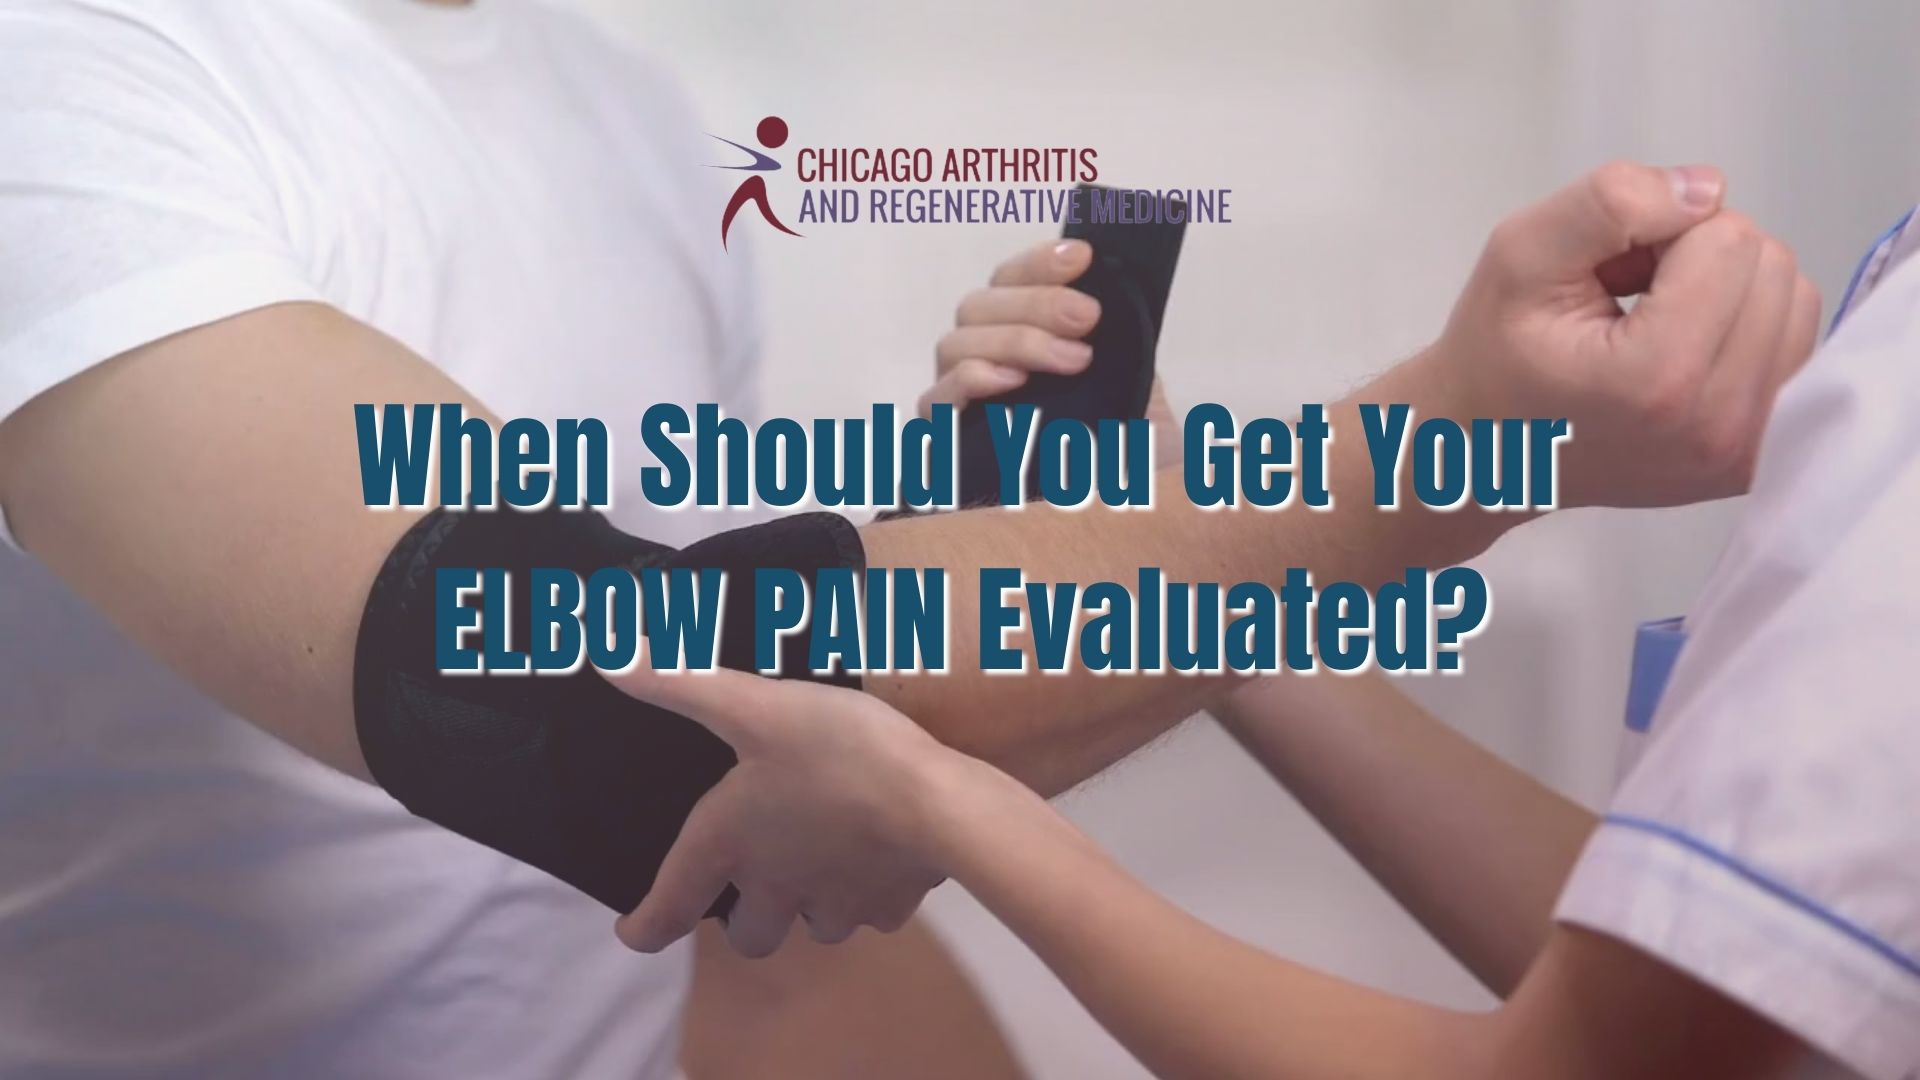 When Should You Get Your Elbow Pain Evaluated?